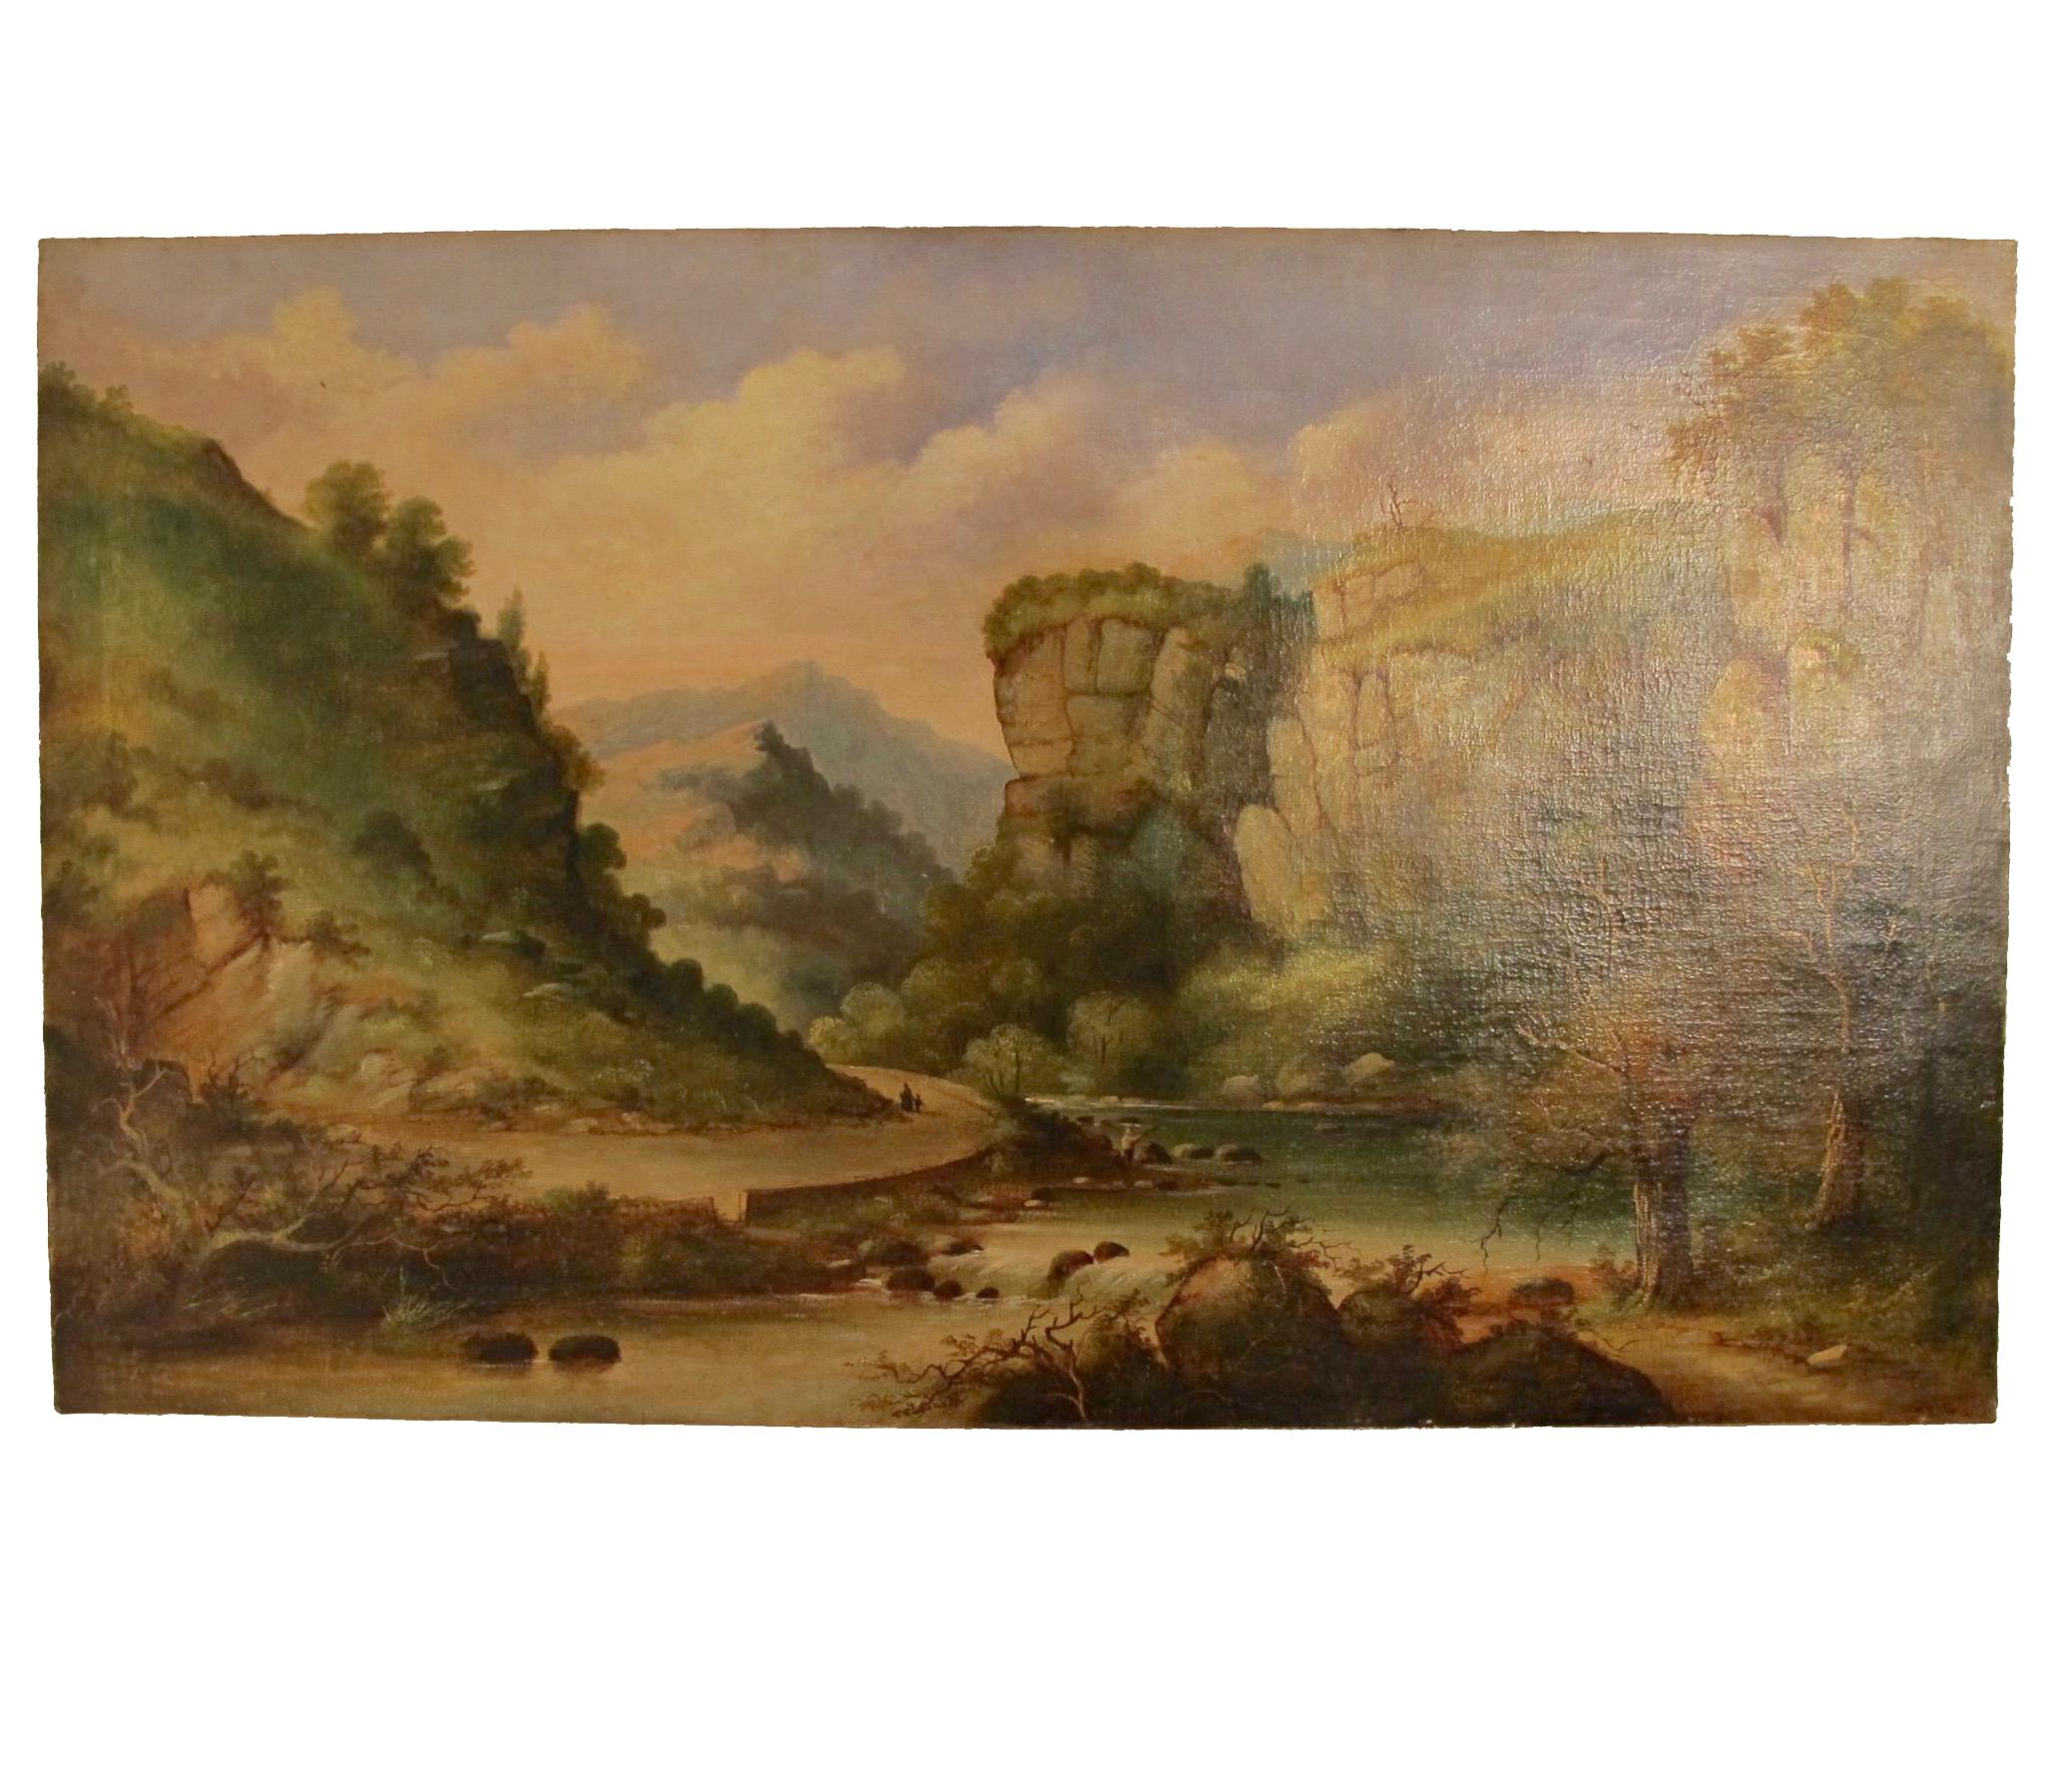 Large oil on canvas of a scenic landscape unframed and unsigned. Continental, early 19th century.
Painting has been recently cleaned.